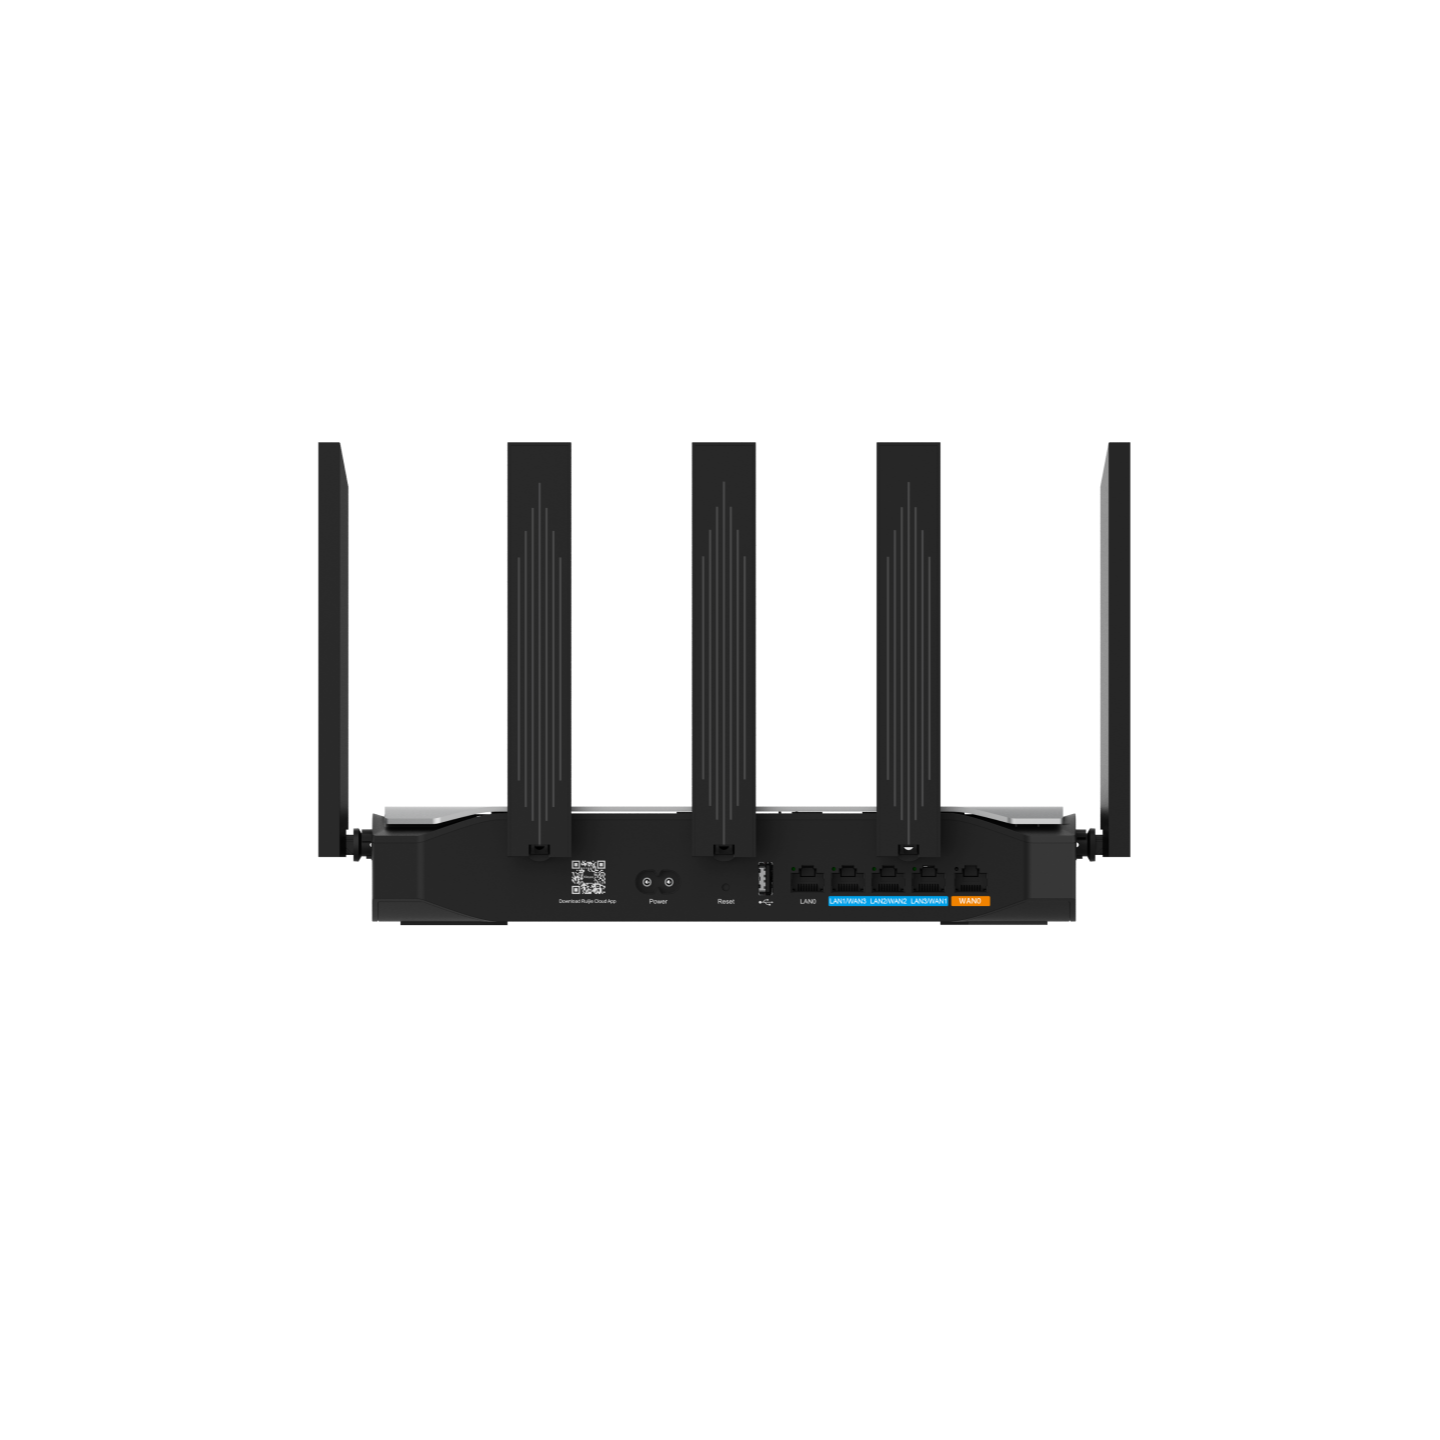 Ruijie RG-EG105GW-X Wi-Fi 6 AX3000 High-performance All-in-One Wireless Router